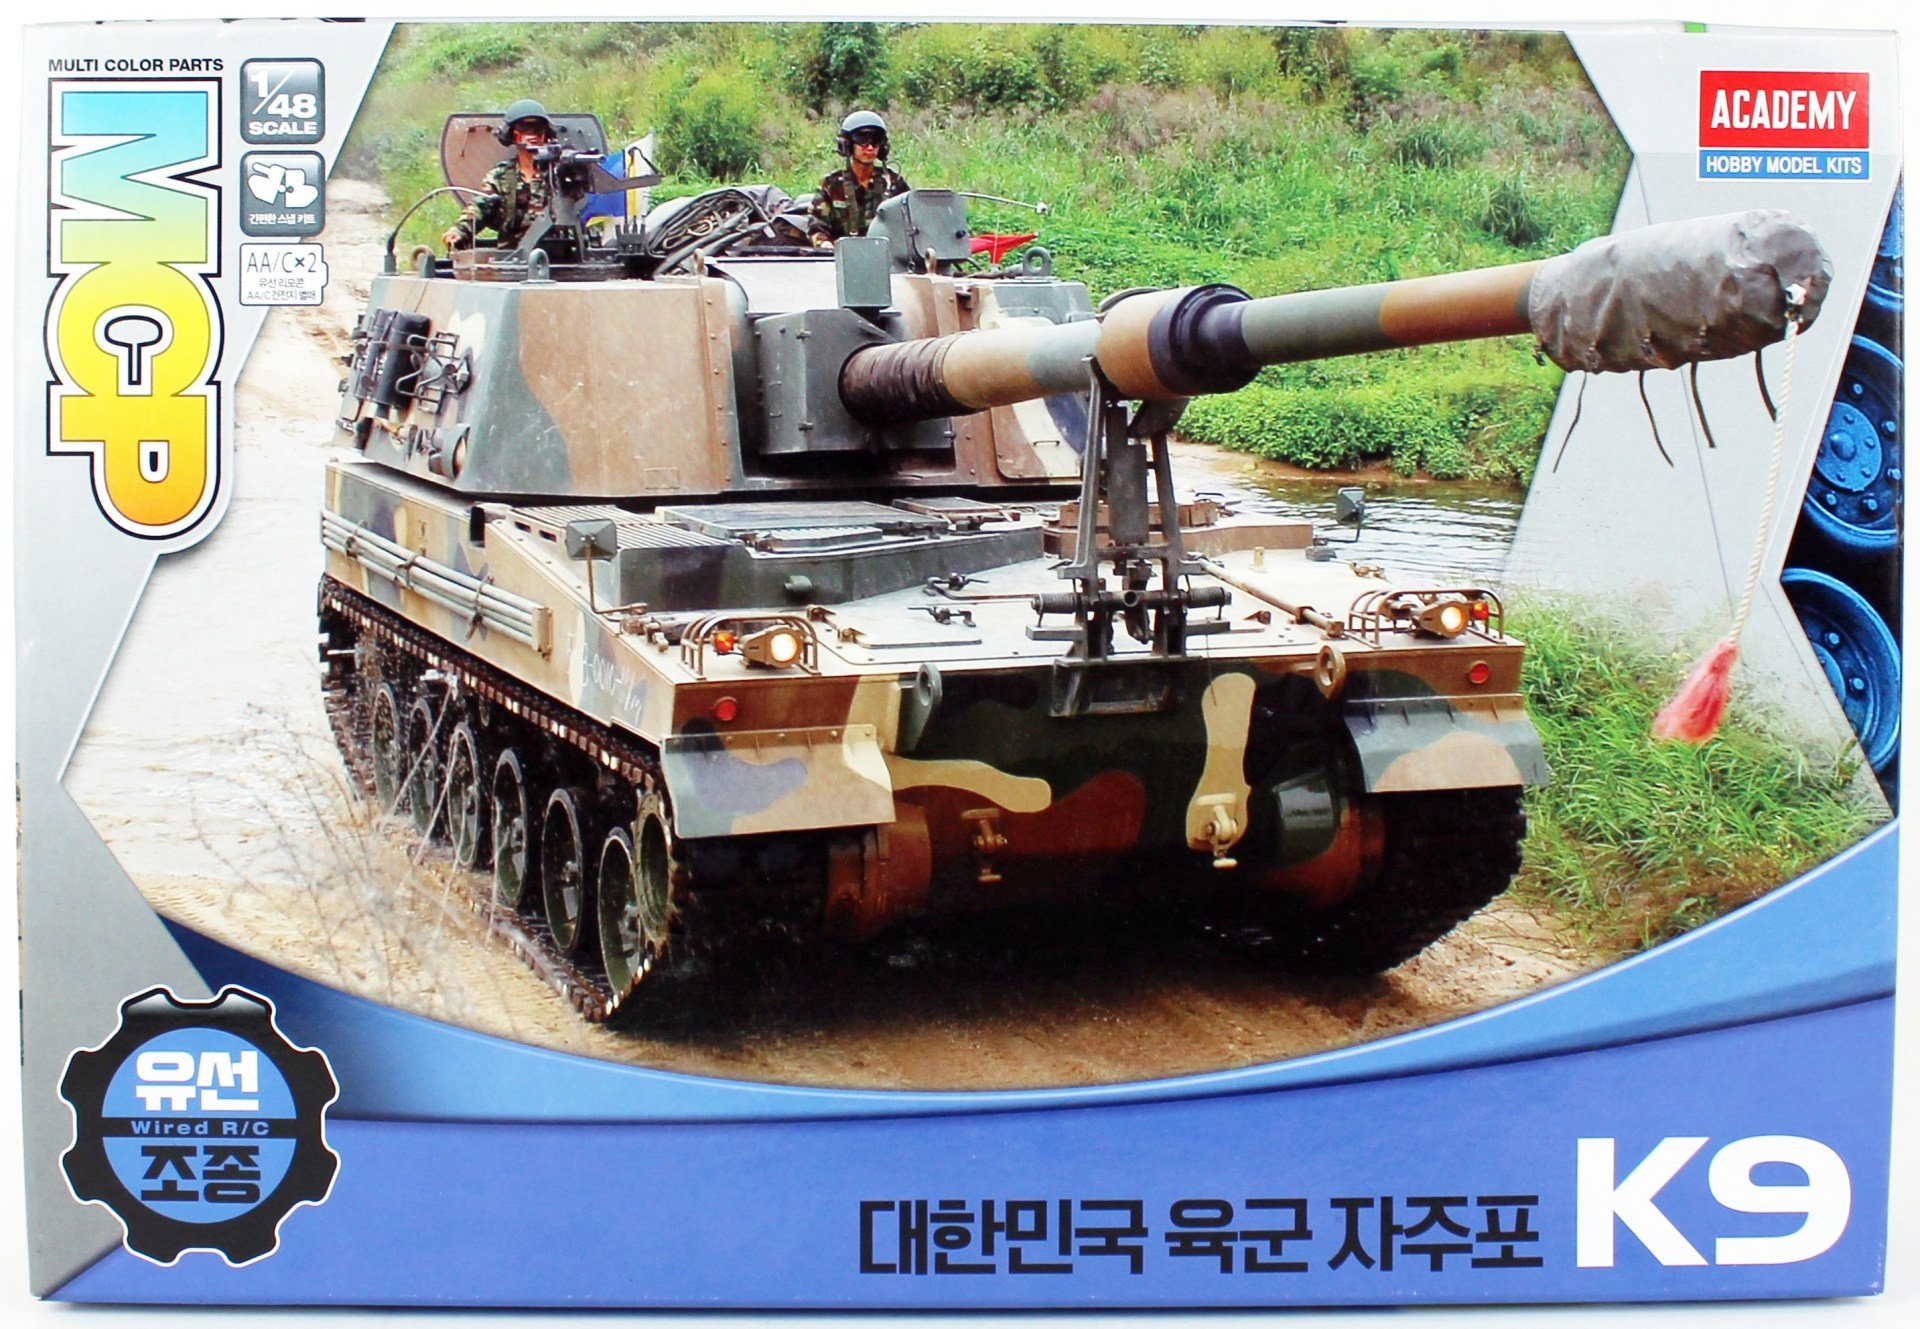 Academy 1/48 Model South Korean K9 Self-Propelled Cannon